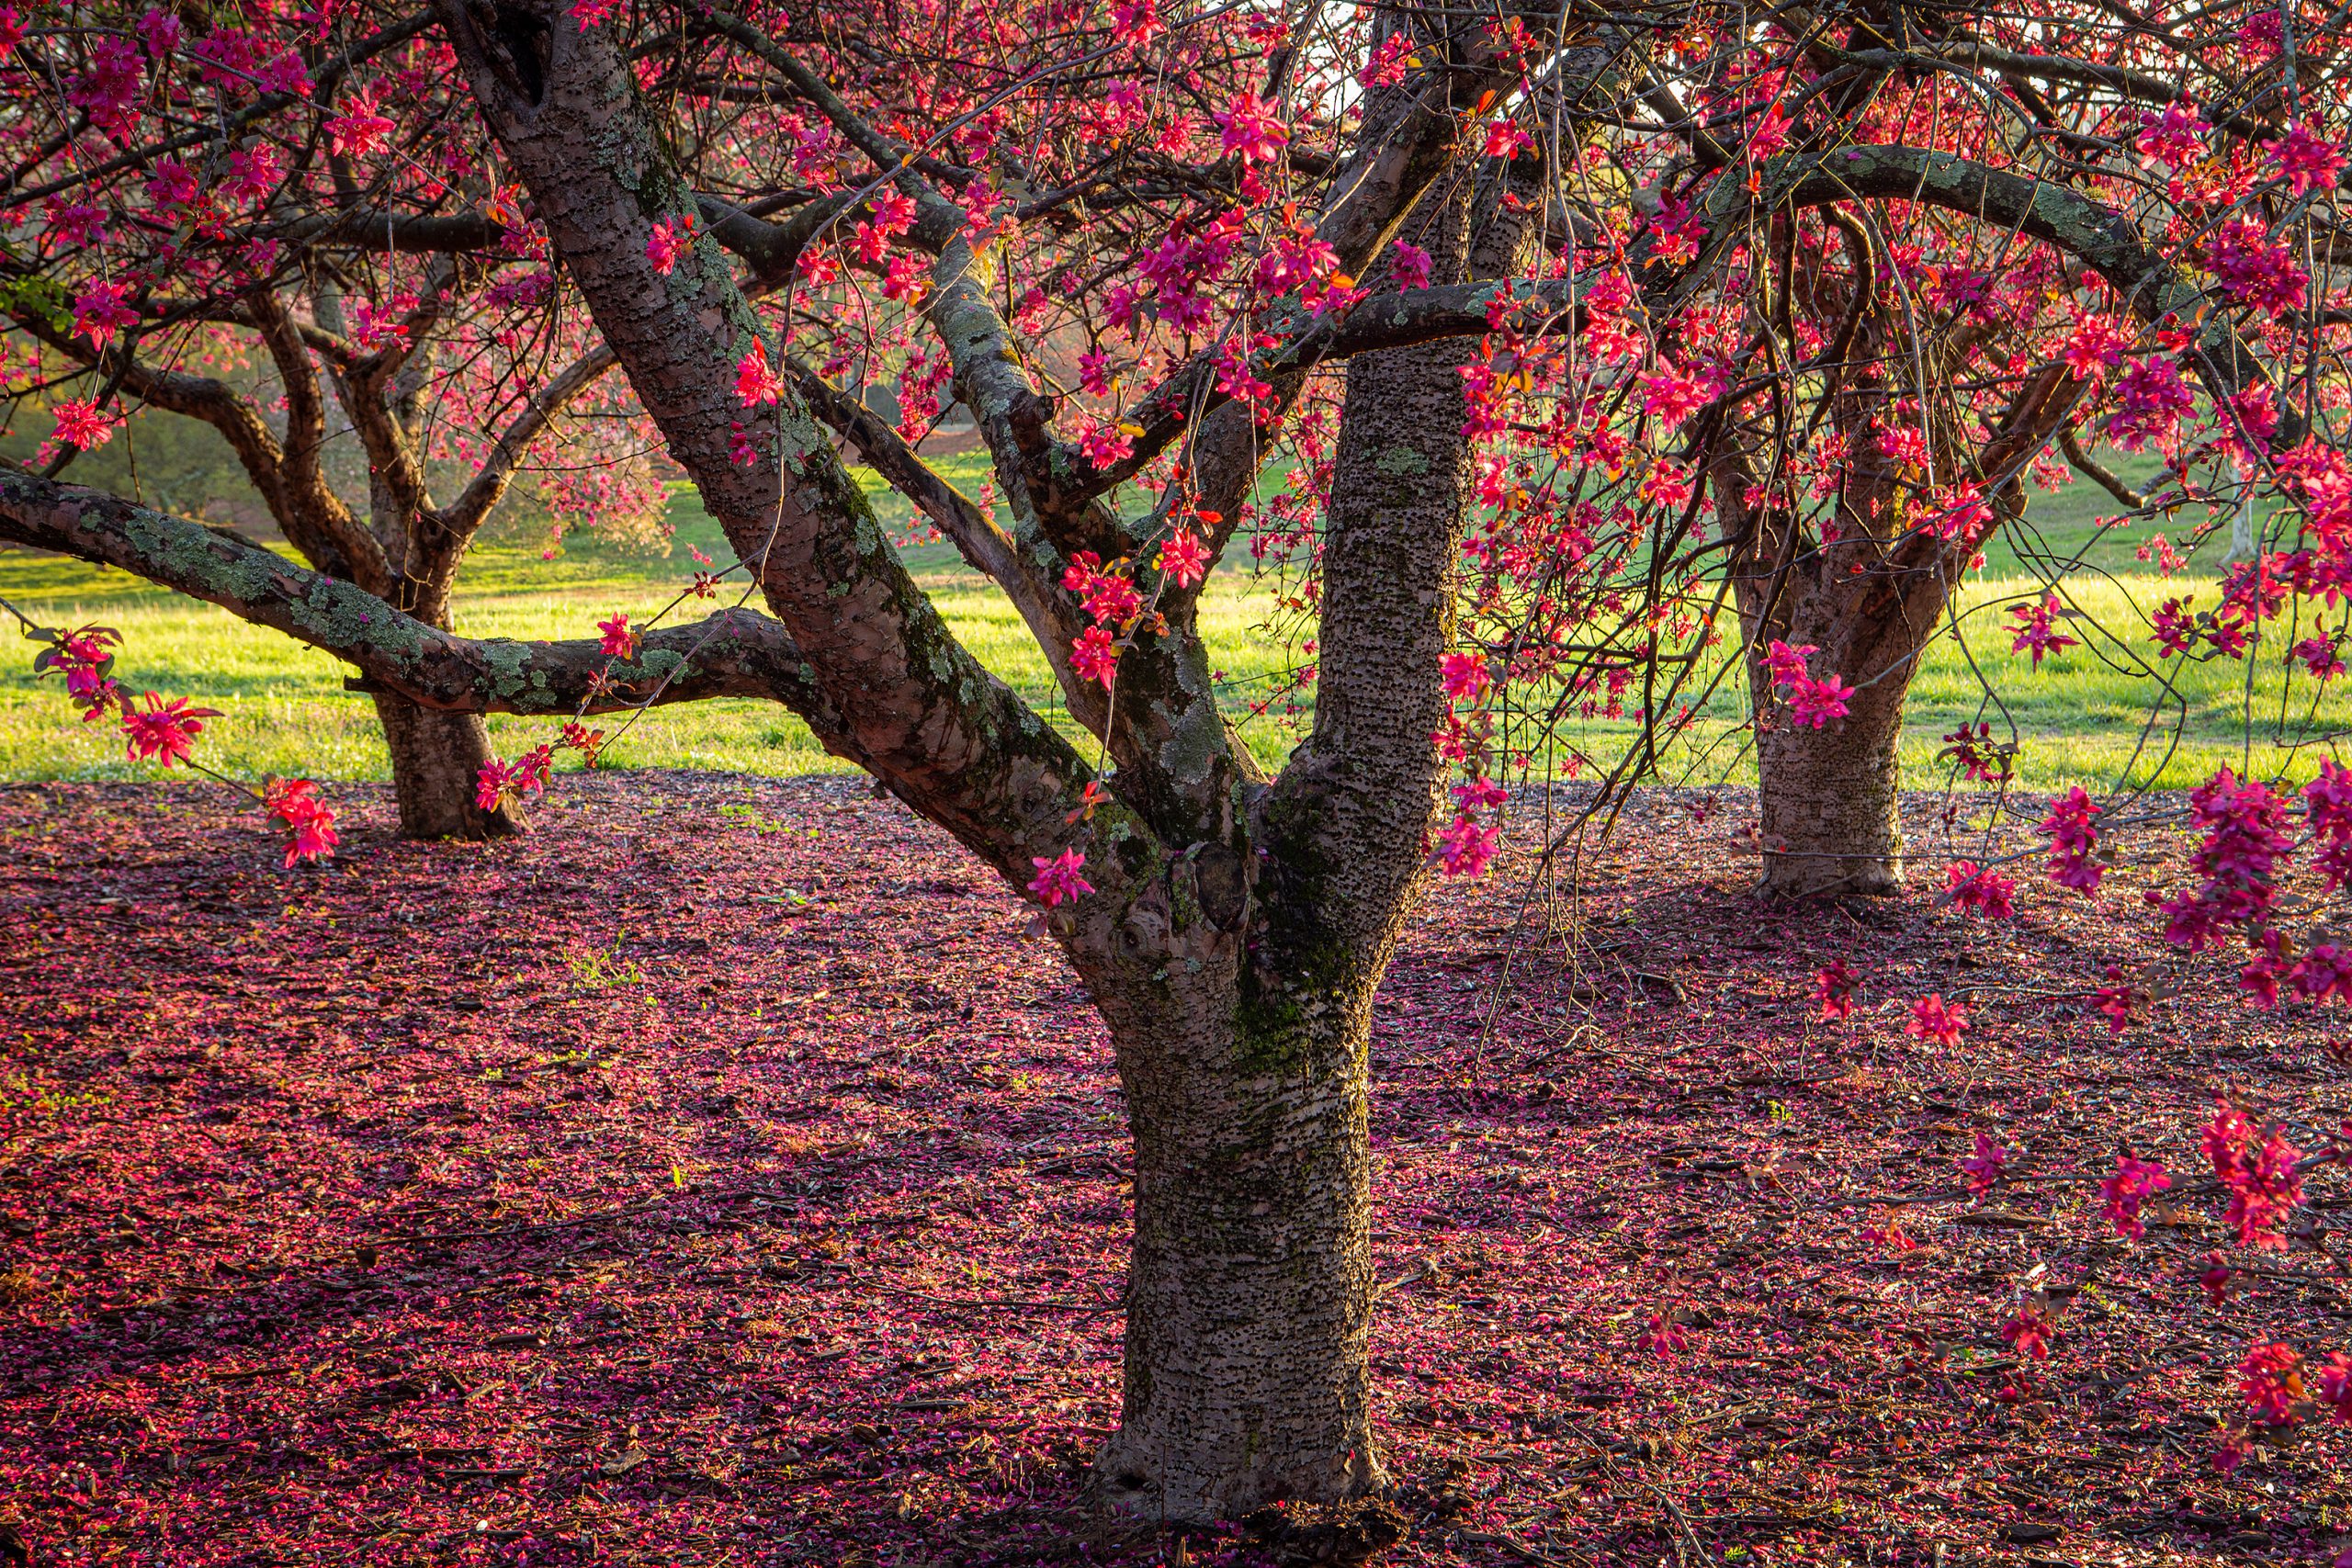 Roger Milliken’s foresight rewards us with a grove of flowering crabapple.
